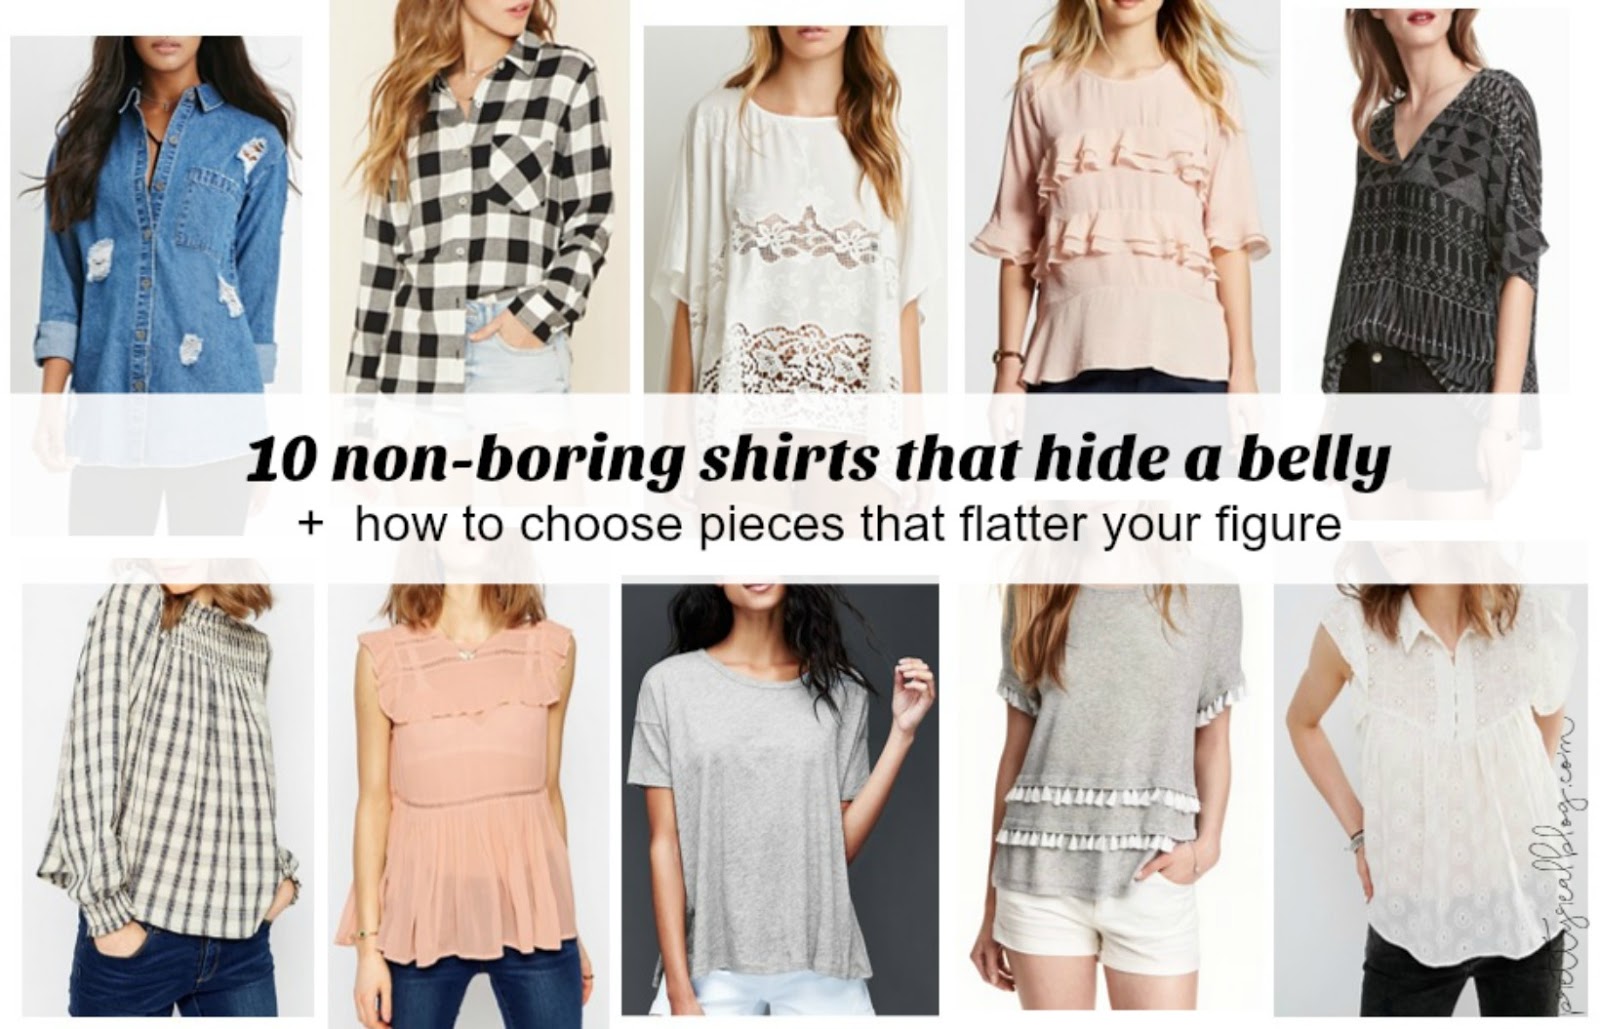 What tops should I wear to hide a big stomach? - Quora